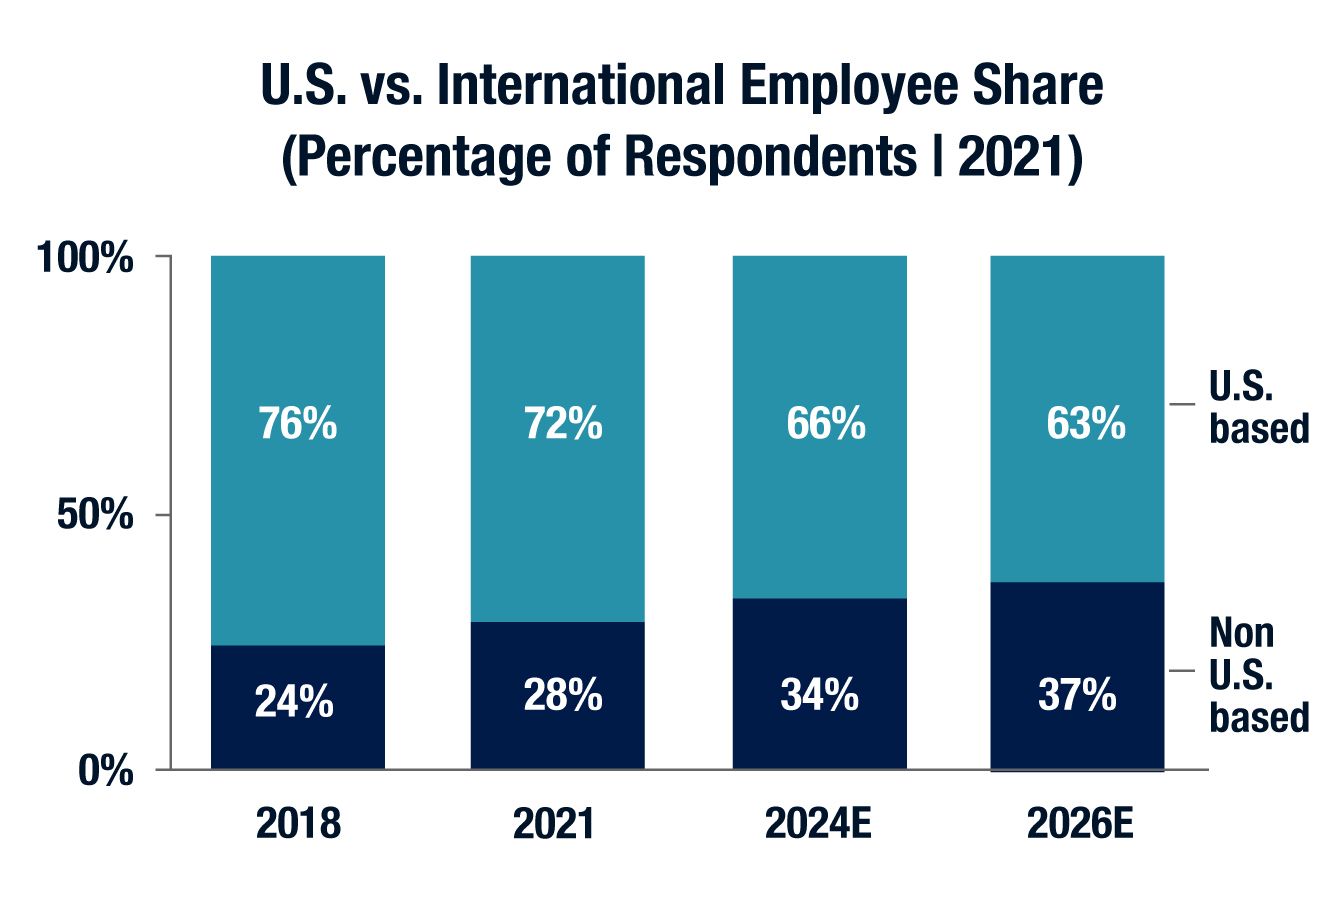 A bar chart showing US vs. International Employee Share (Percentage of Respondents 2021). Trends from 2018, 2021, 2024E, 2026E show there is a growing share of non-US-based employees, but the majority remains to be US based. 